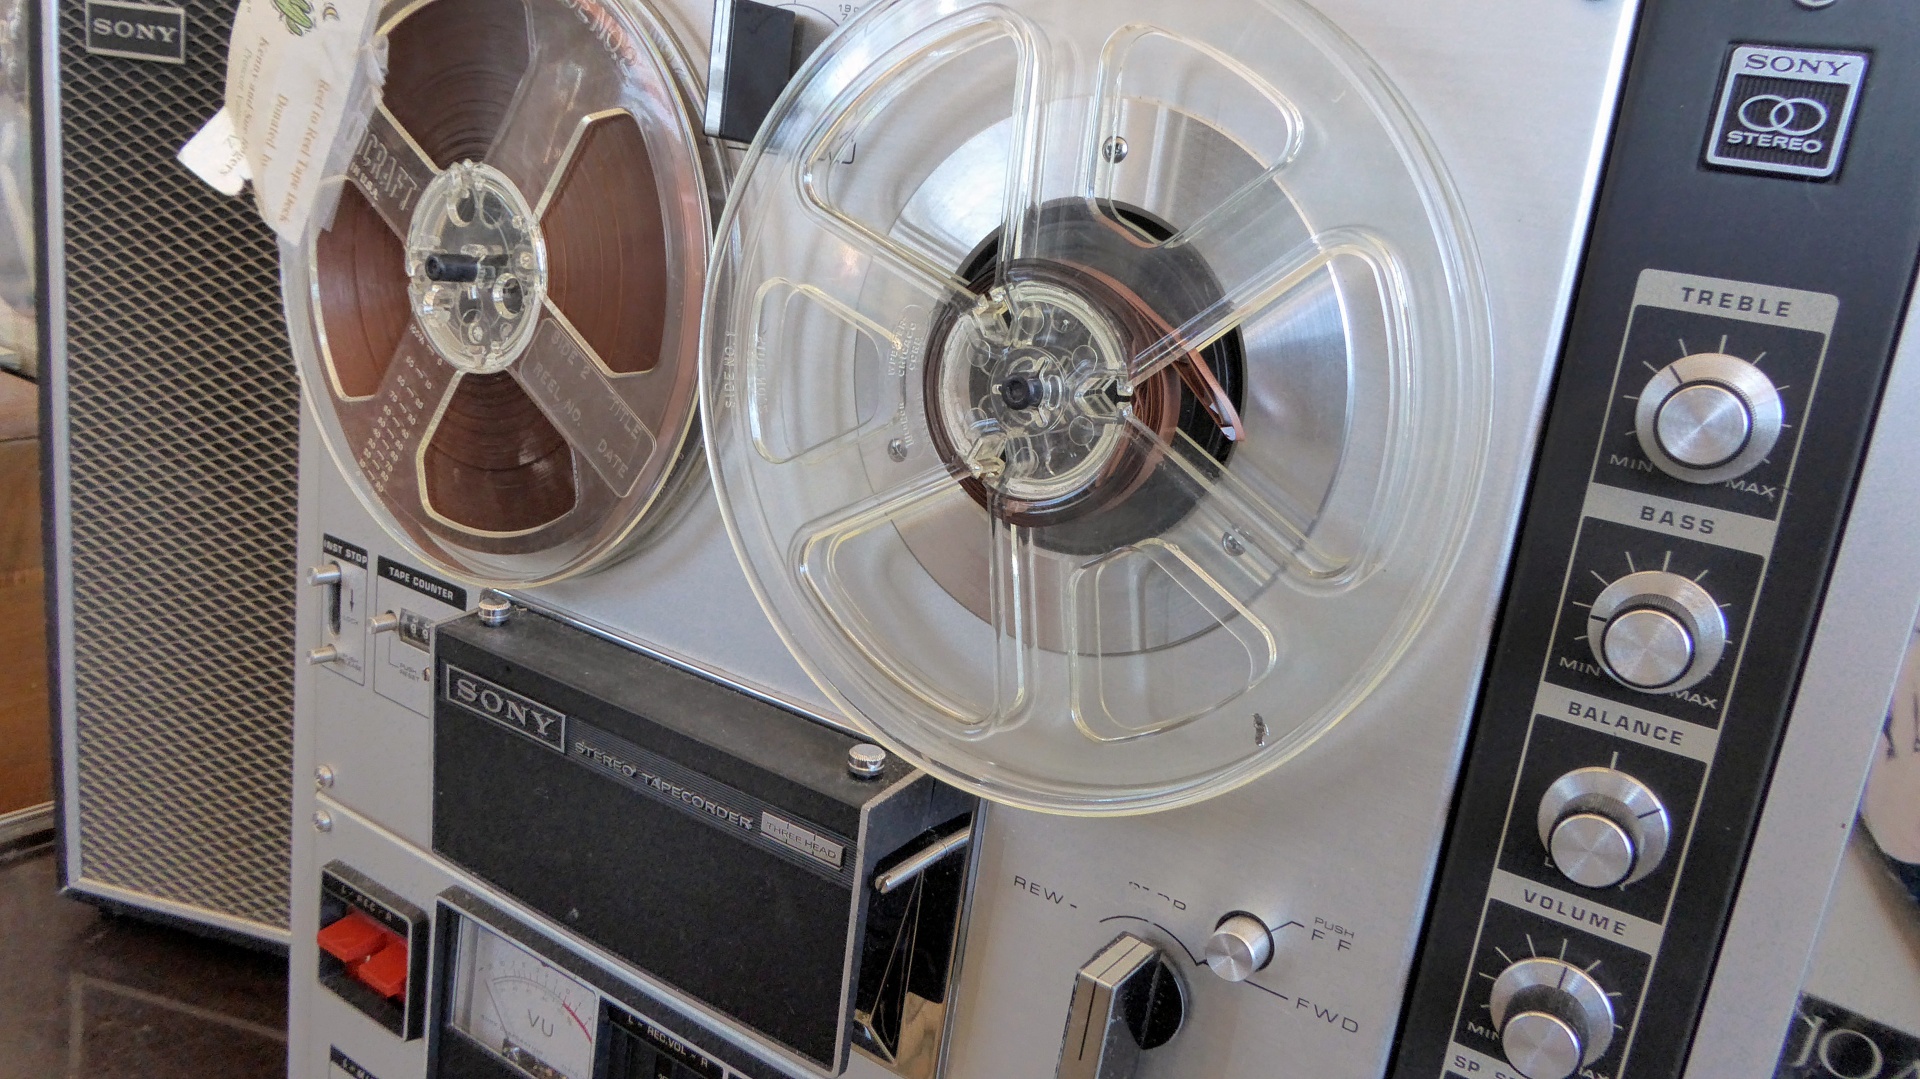 Black and Grey Sony Reel Tape Player · Free Stock Photo